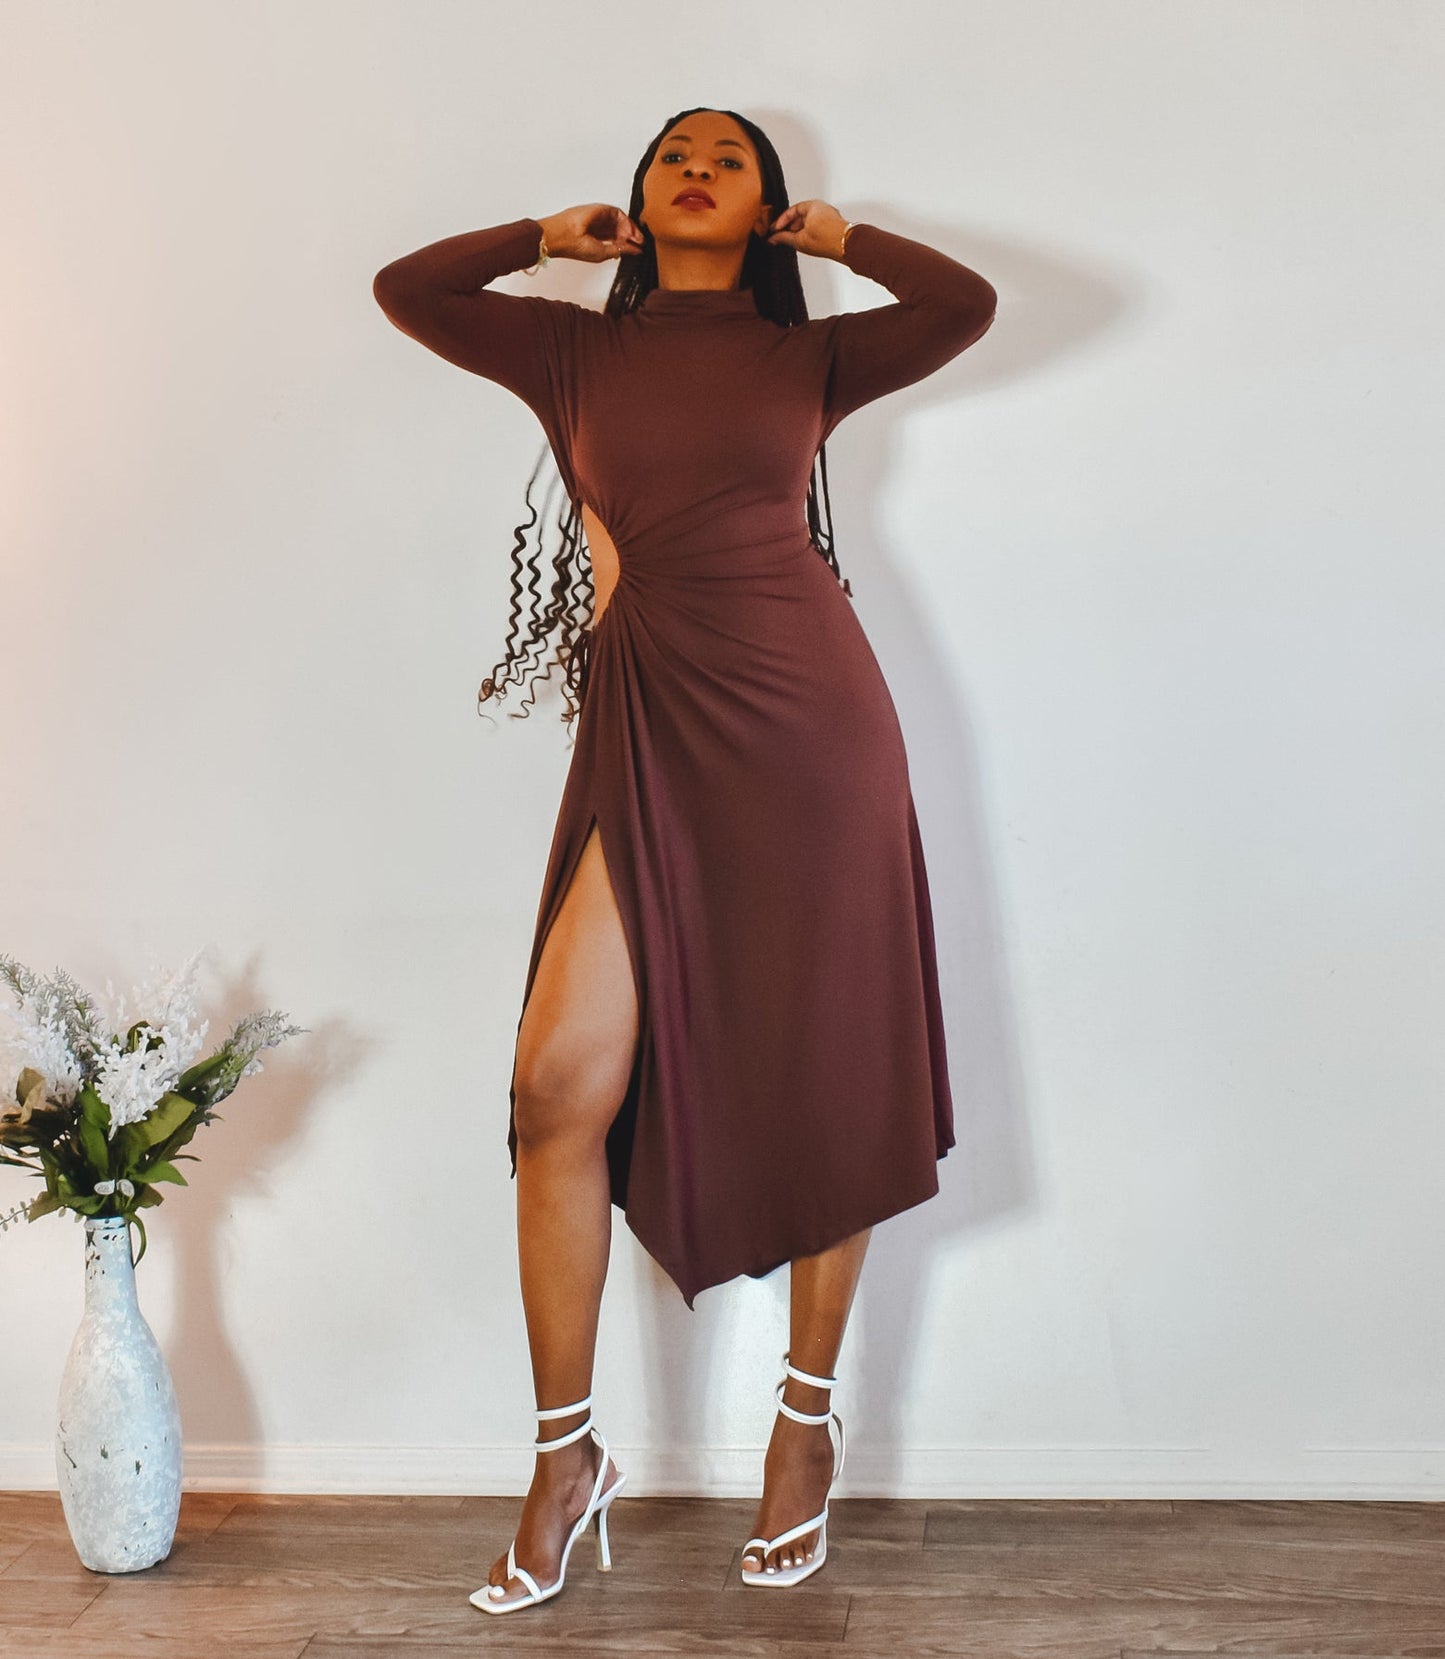 Meet Me There Cut Out Slit Dress